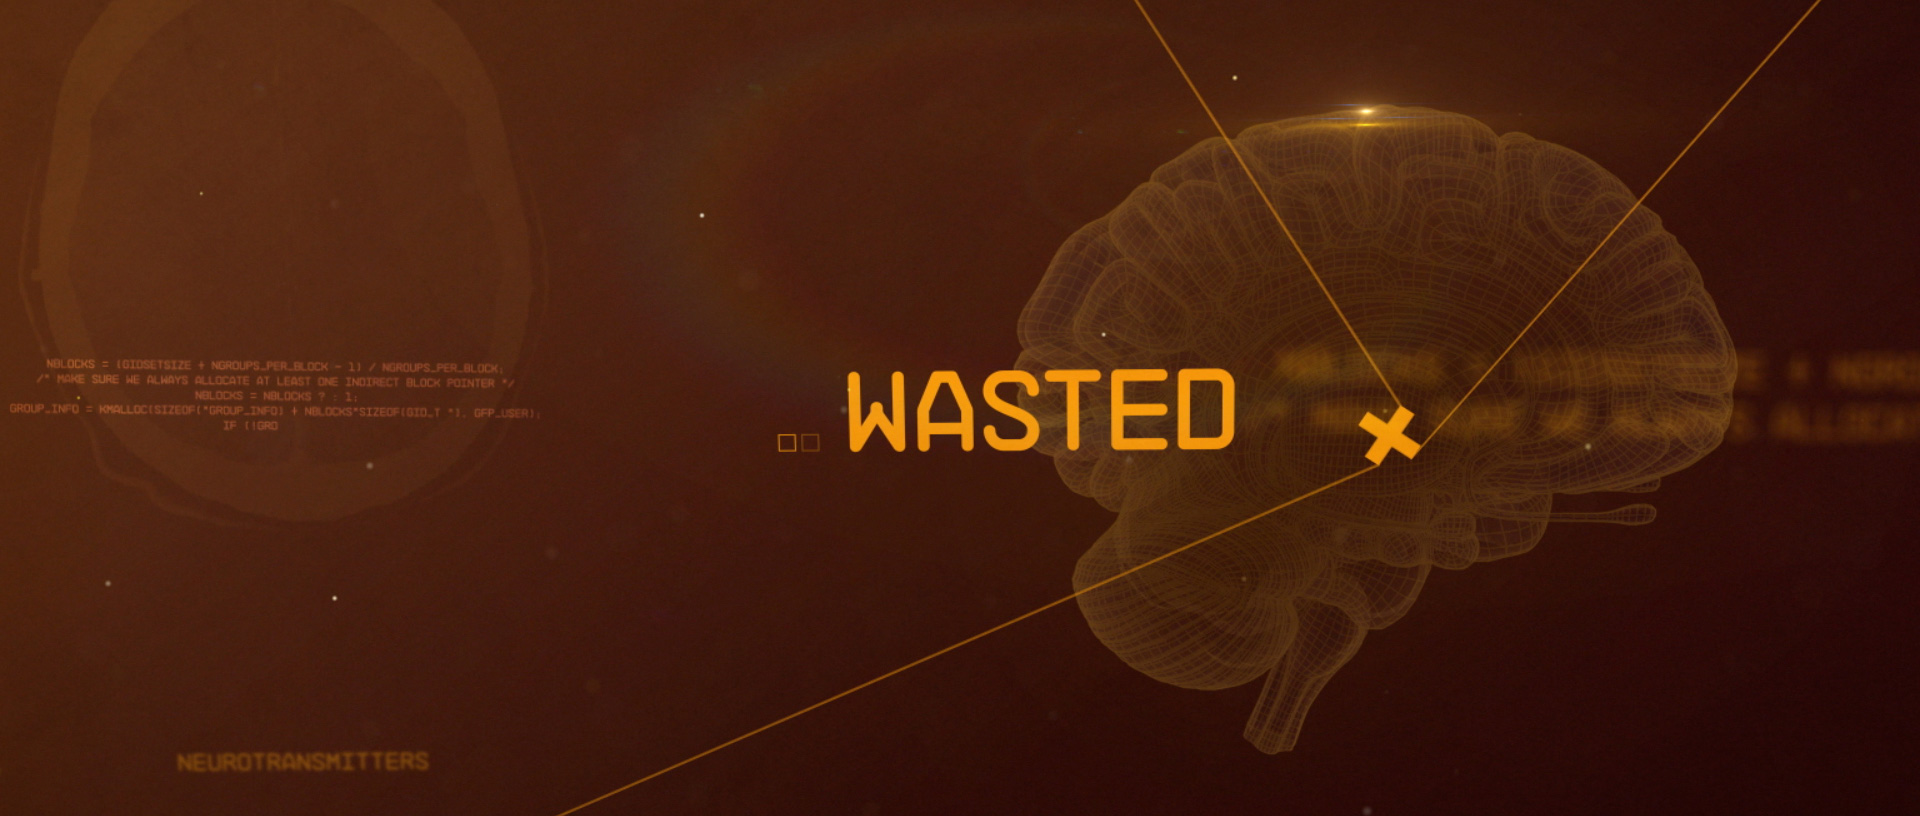 WASTED Documentary